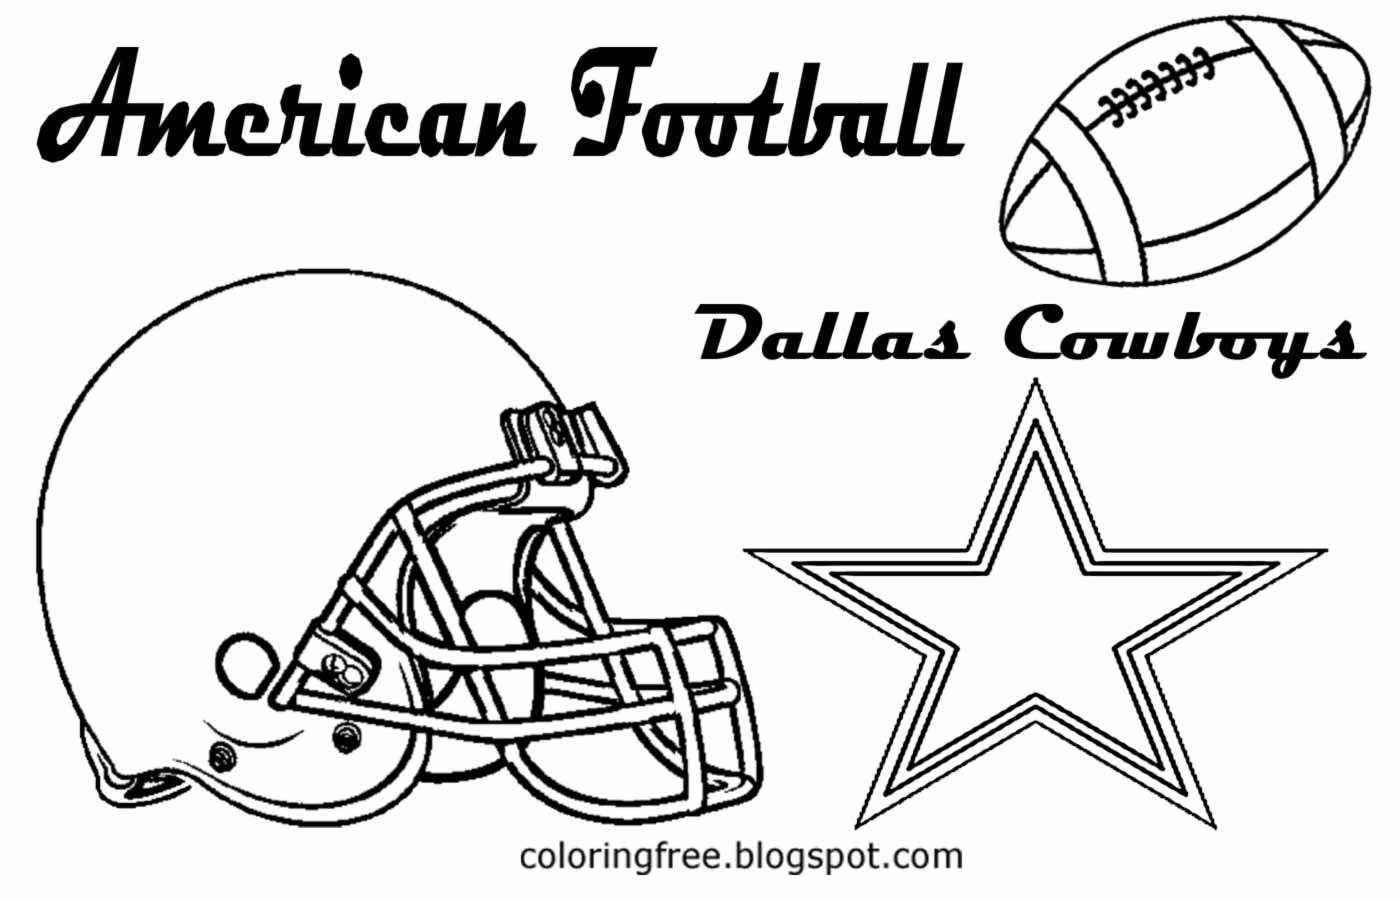 The Best Dallas Cowboys Coloring Pages - Home, Family, Style and Art Ideas